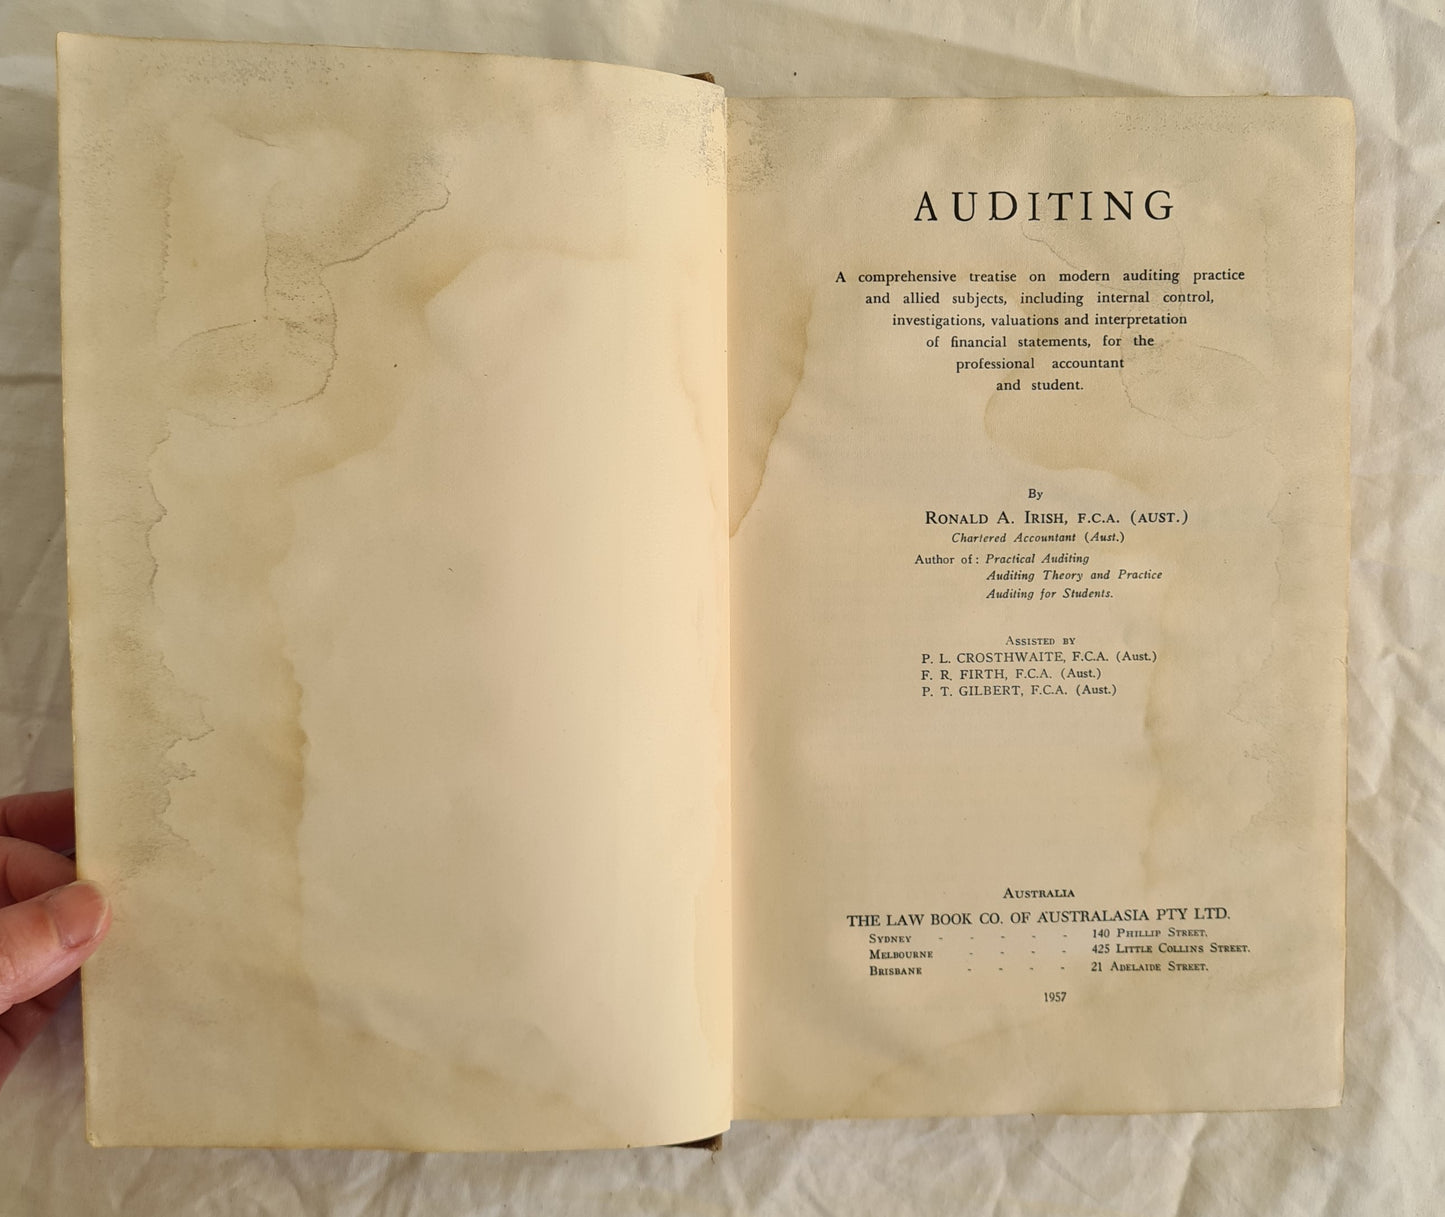 Auditing  A comprehensive treatise on modern auditing practice and allied subjects, including internal control, investigations, valuations and interpretation of financial statements, for the professional accountant and student.  by Ronald A. Irish